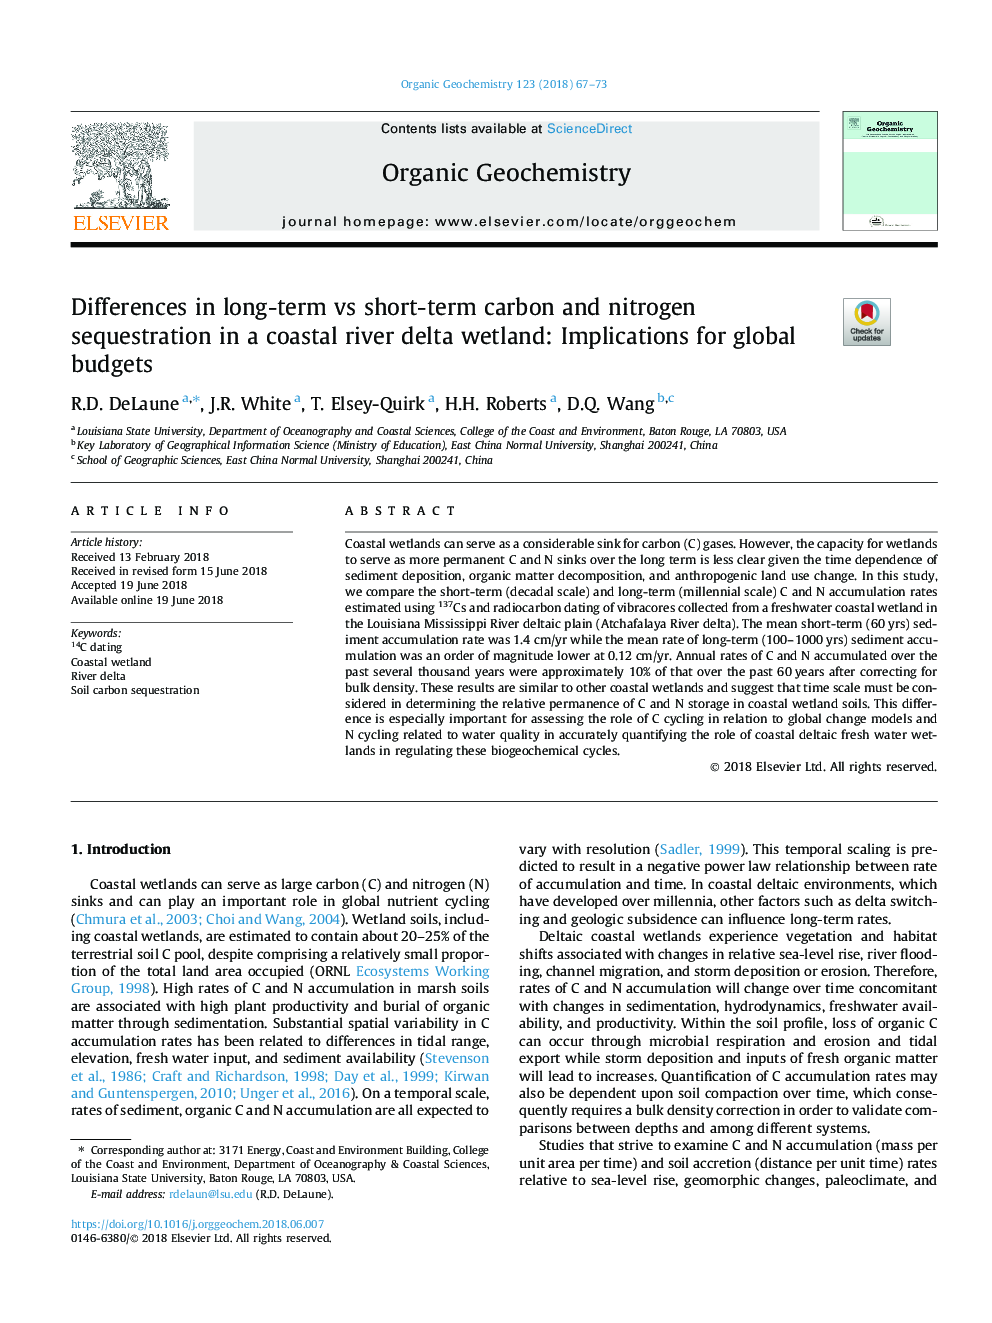 Differences in long-term vs short-term carbon and nitrogen sequestration in a coastal river delta wetland: Implications for global budgets